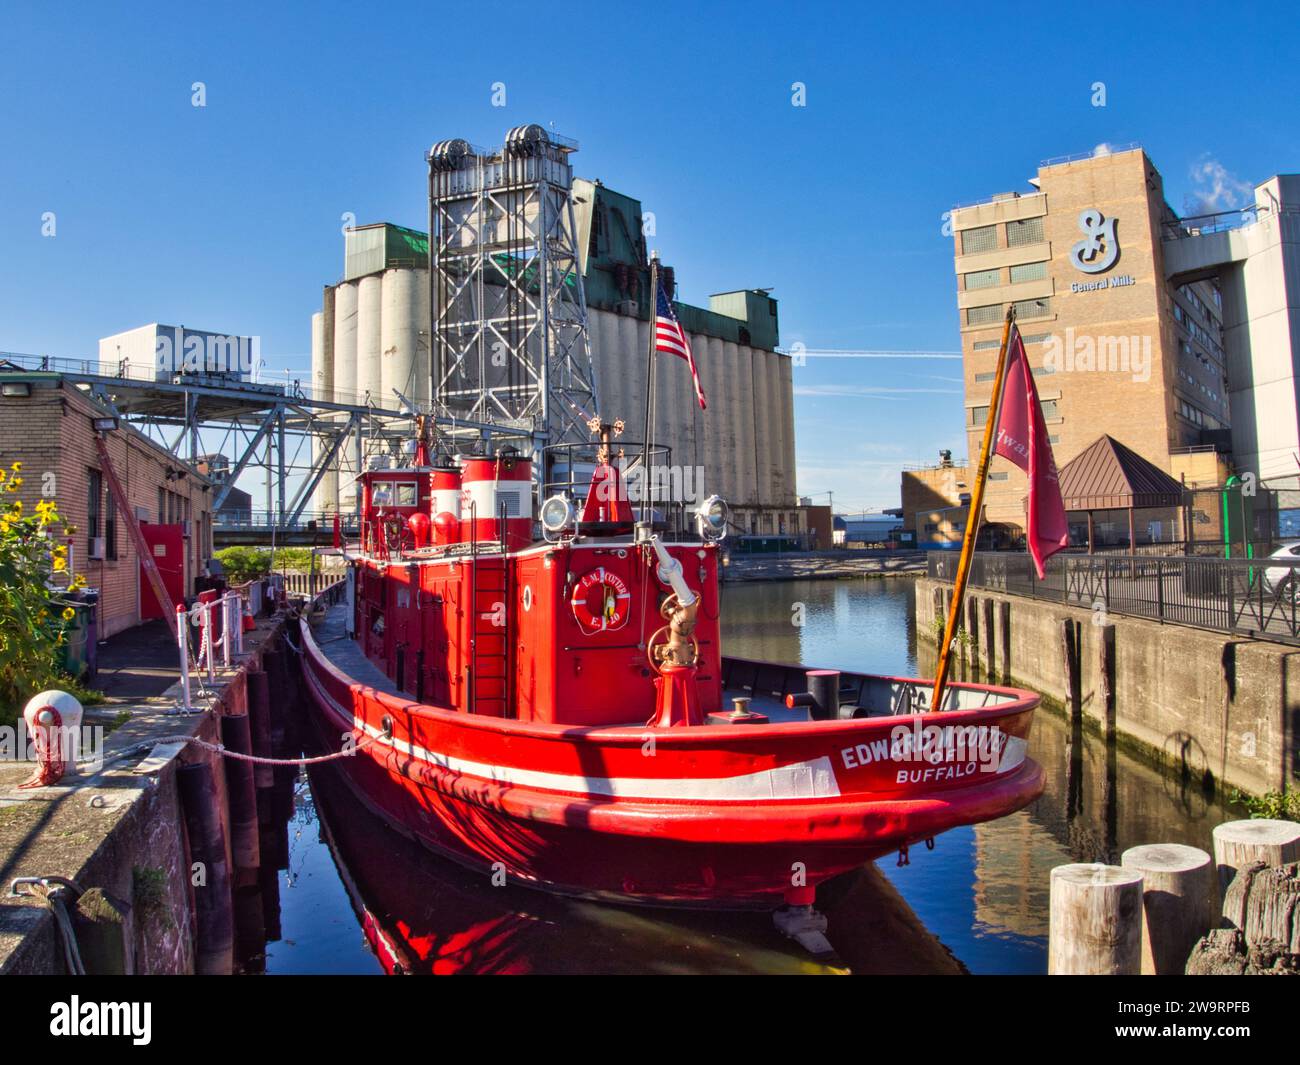 Edward M. Cotter fireboat anchored in Buffalo, NY, in front of General Mills factory and industrial waterfront of Buffalo. Stock Photo